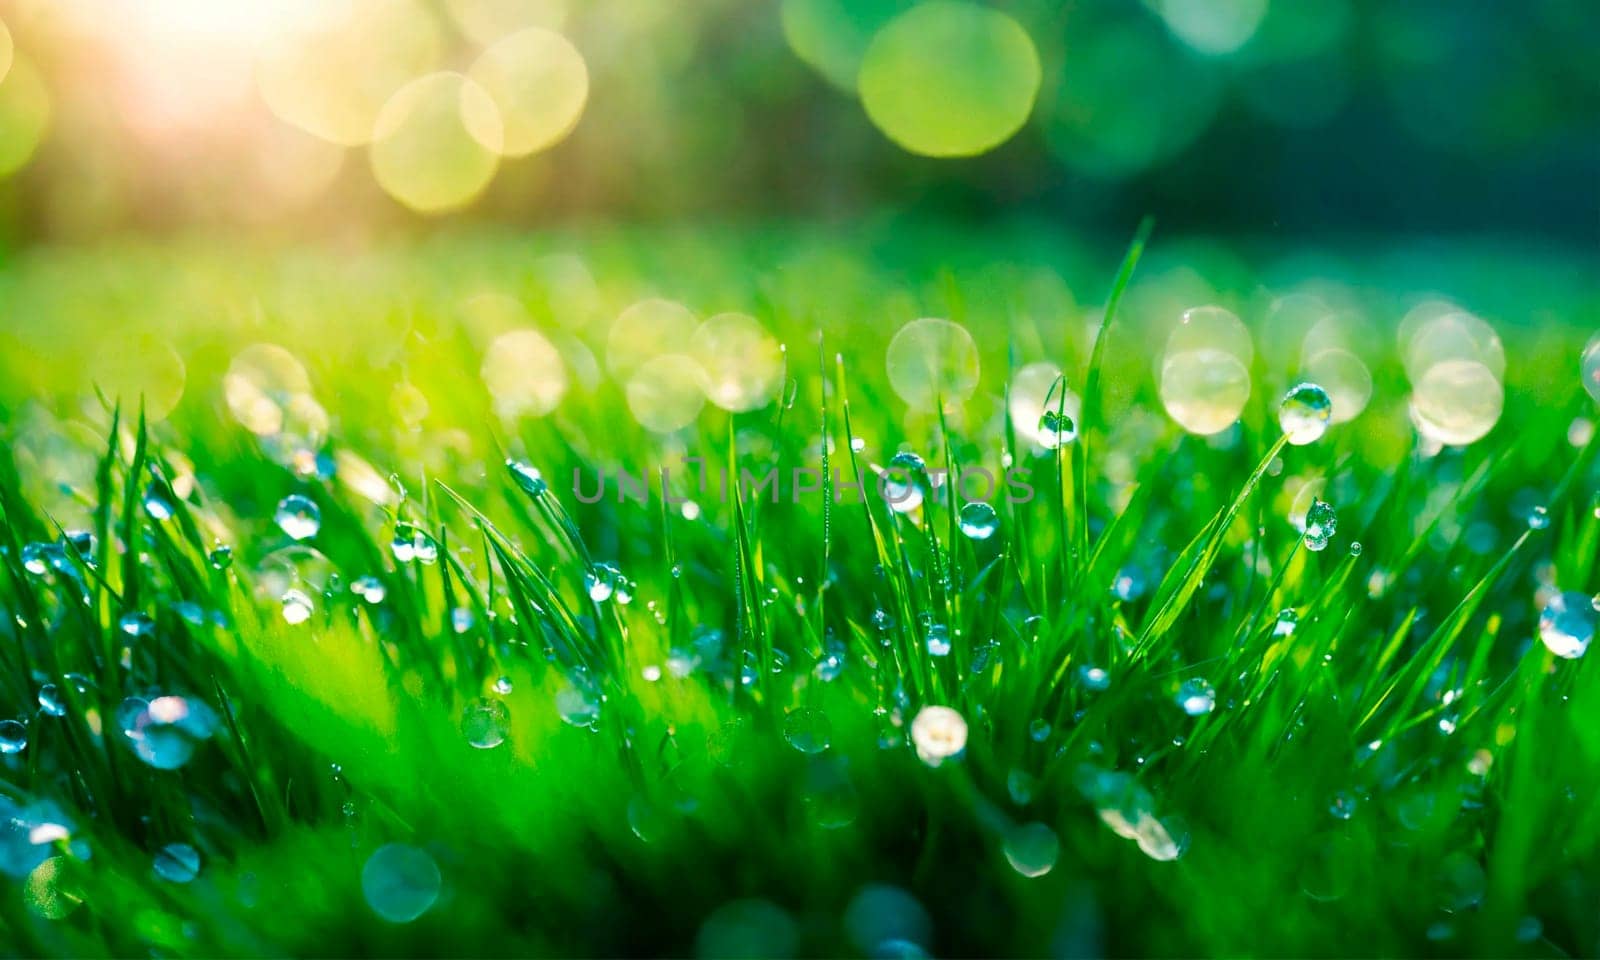 dew on the grass rays of the sun. Selective focus. by yanadjana